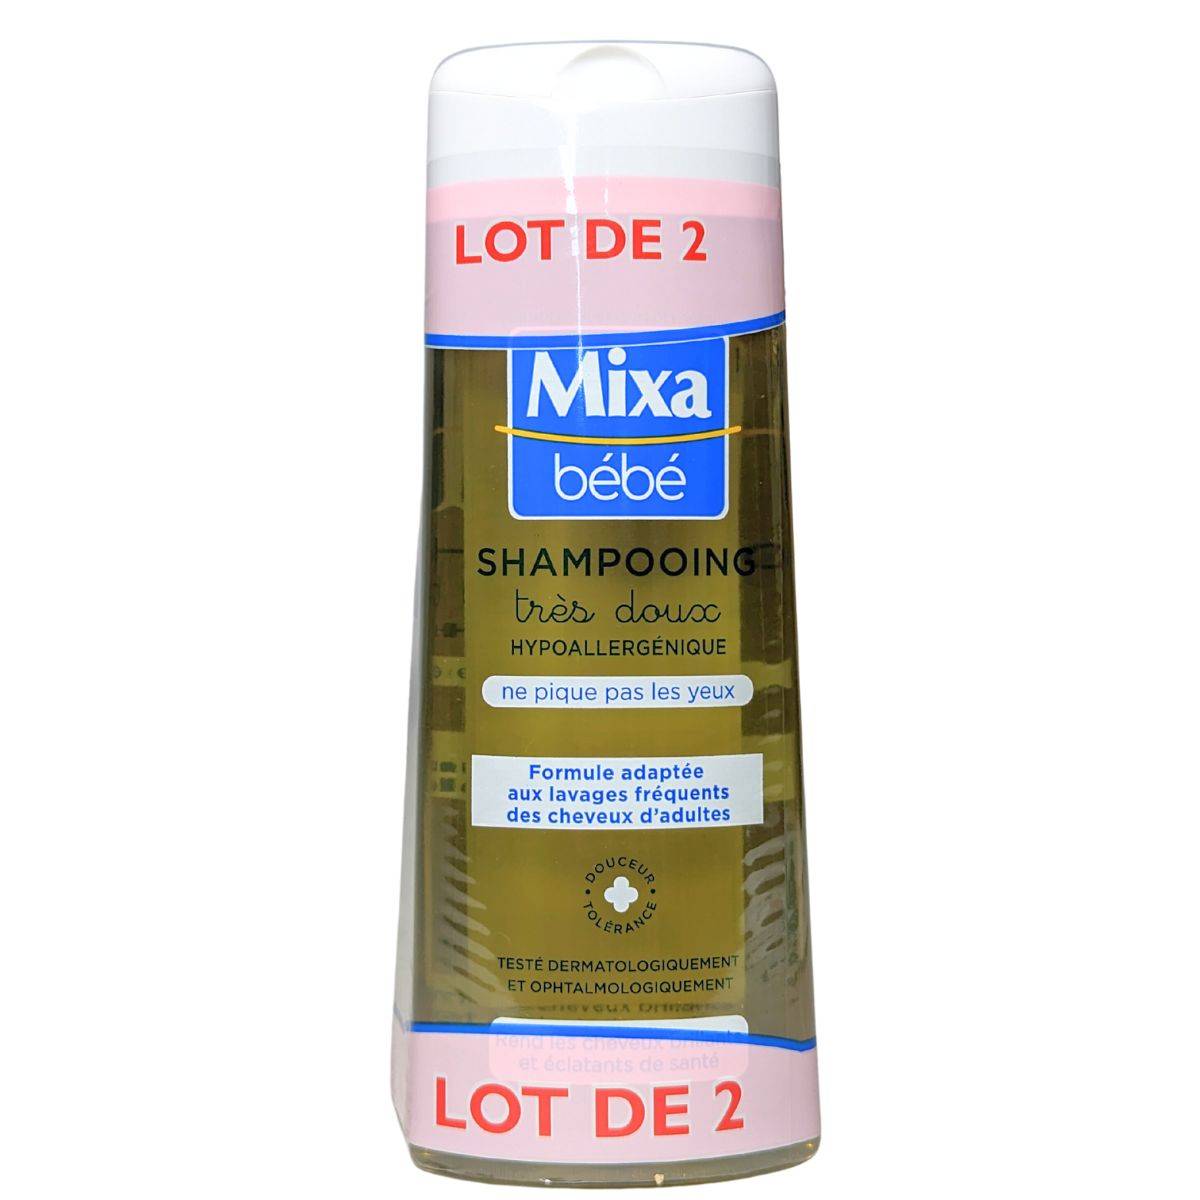 Mixa bebe, shampooing tres doux, lavages frequents